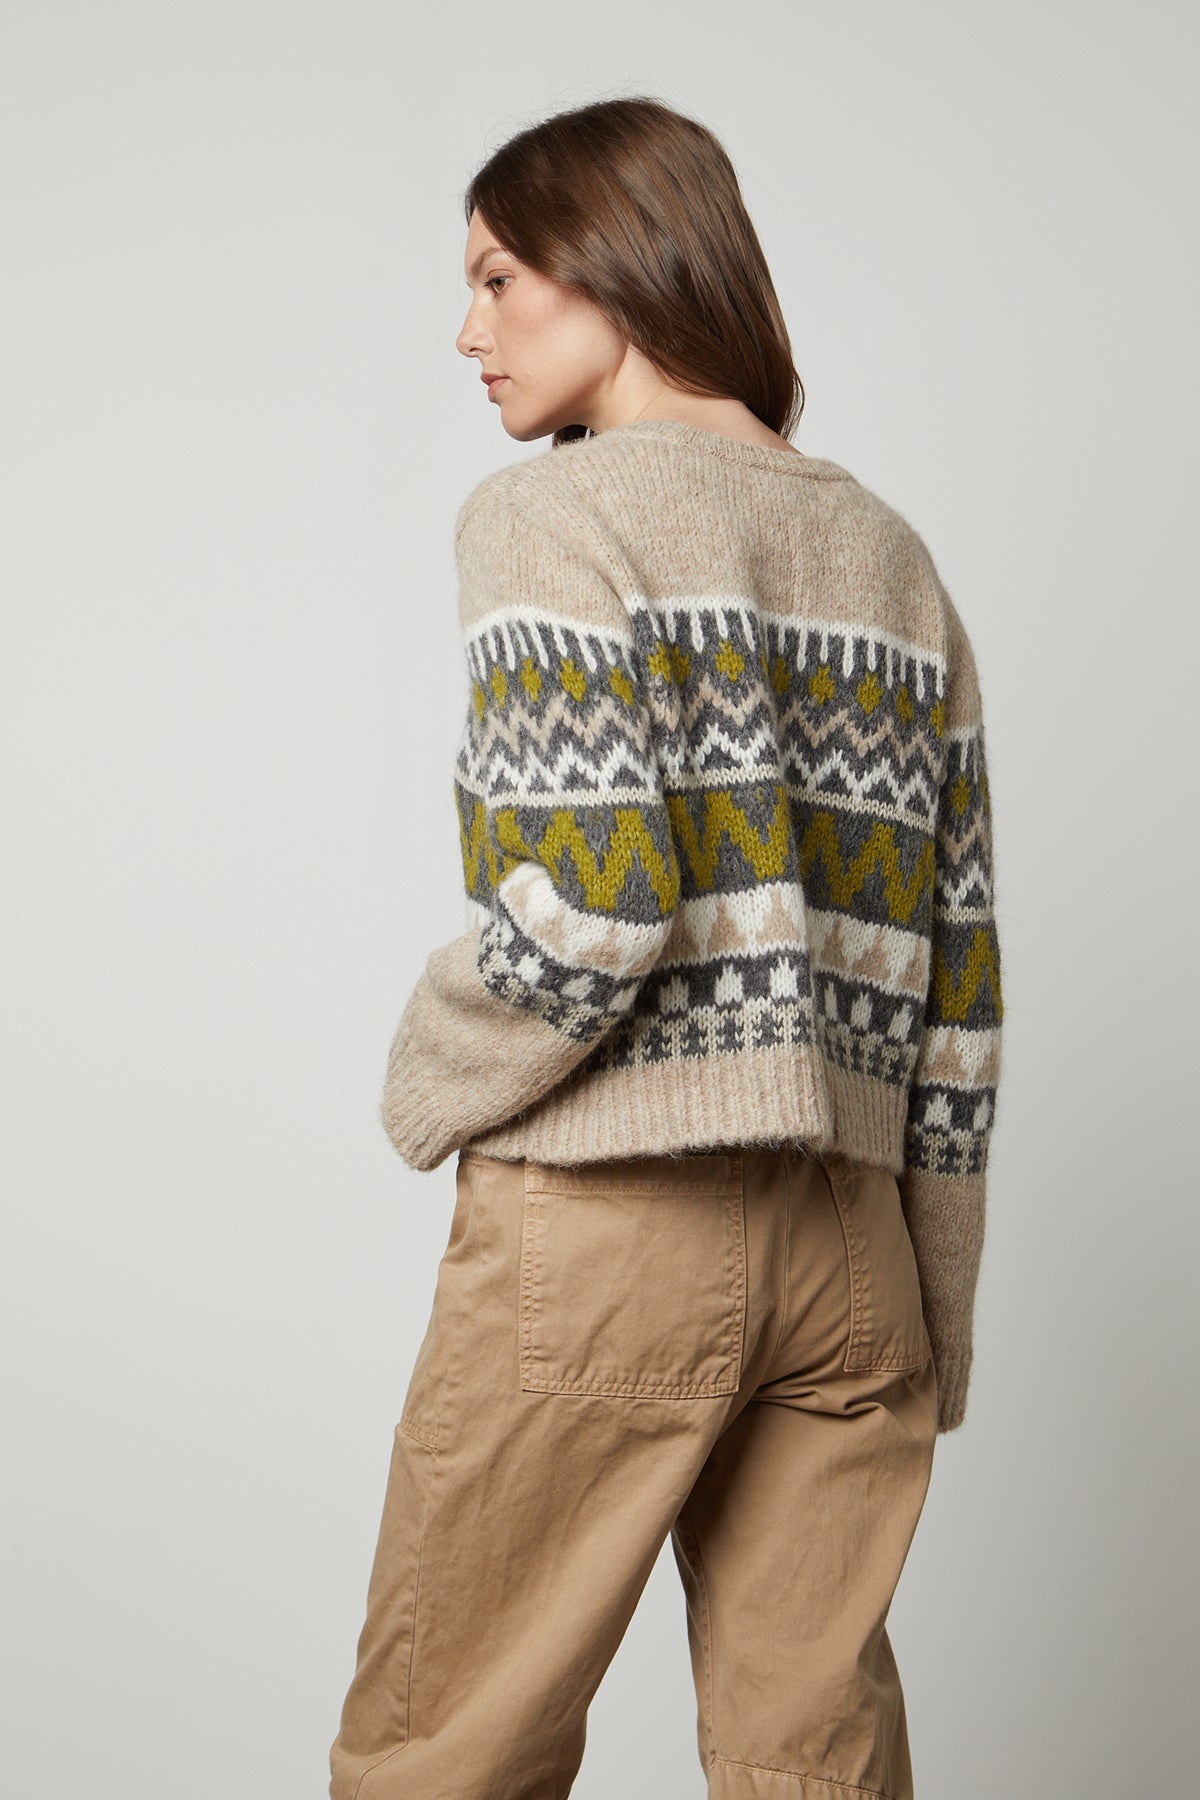   The back view of a woman wearing a cozy Velvet by Graham & Spencer MAKENZIE ALPACA CABLE KNIT CREW NECK SWEATER and khaki pants. 